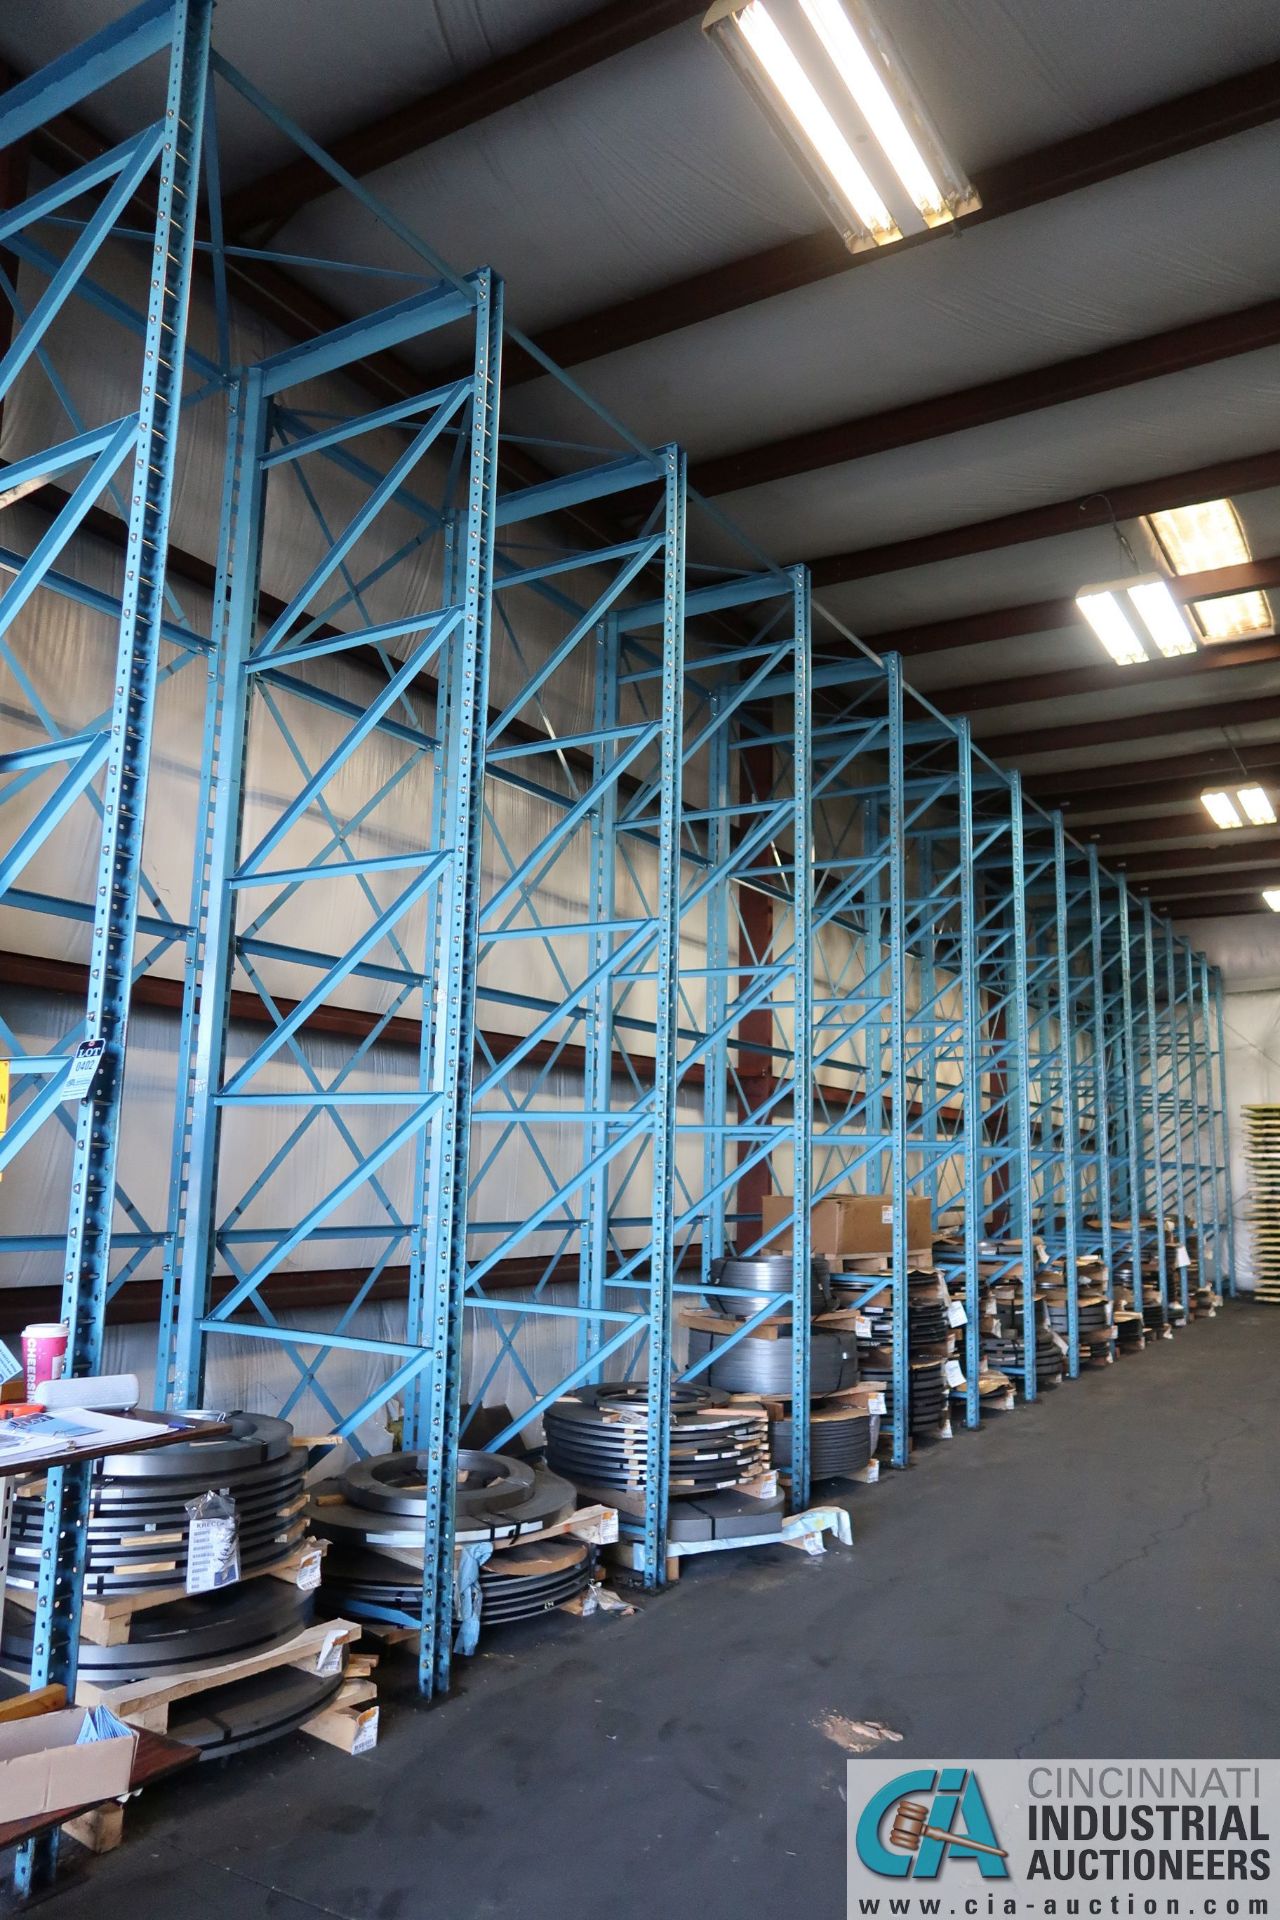 SECTIONS 50" X 50" X 180" HEAVY DUTY ADJUSTABLE DIE STORAGE RACK SYSTEM, 25,000 LB. CAPACITY PER